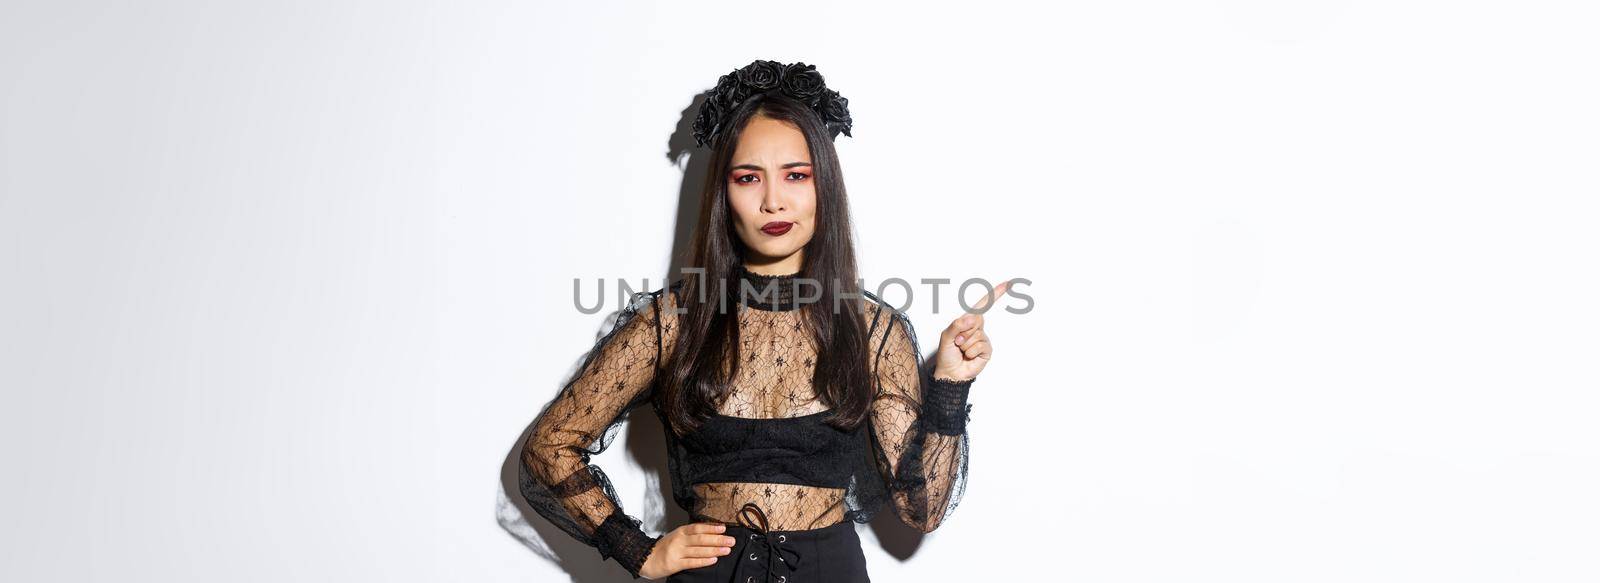 Image of disappointed and skeptical asian woman in witch costume complaining on something, pointing upper left corner and grimacing dissatisfied, standing over white background in halloween dress.